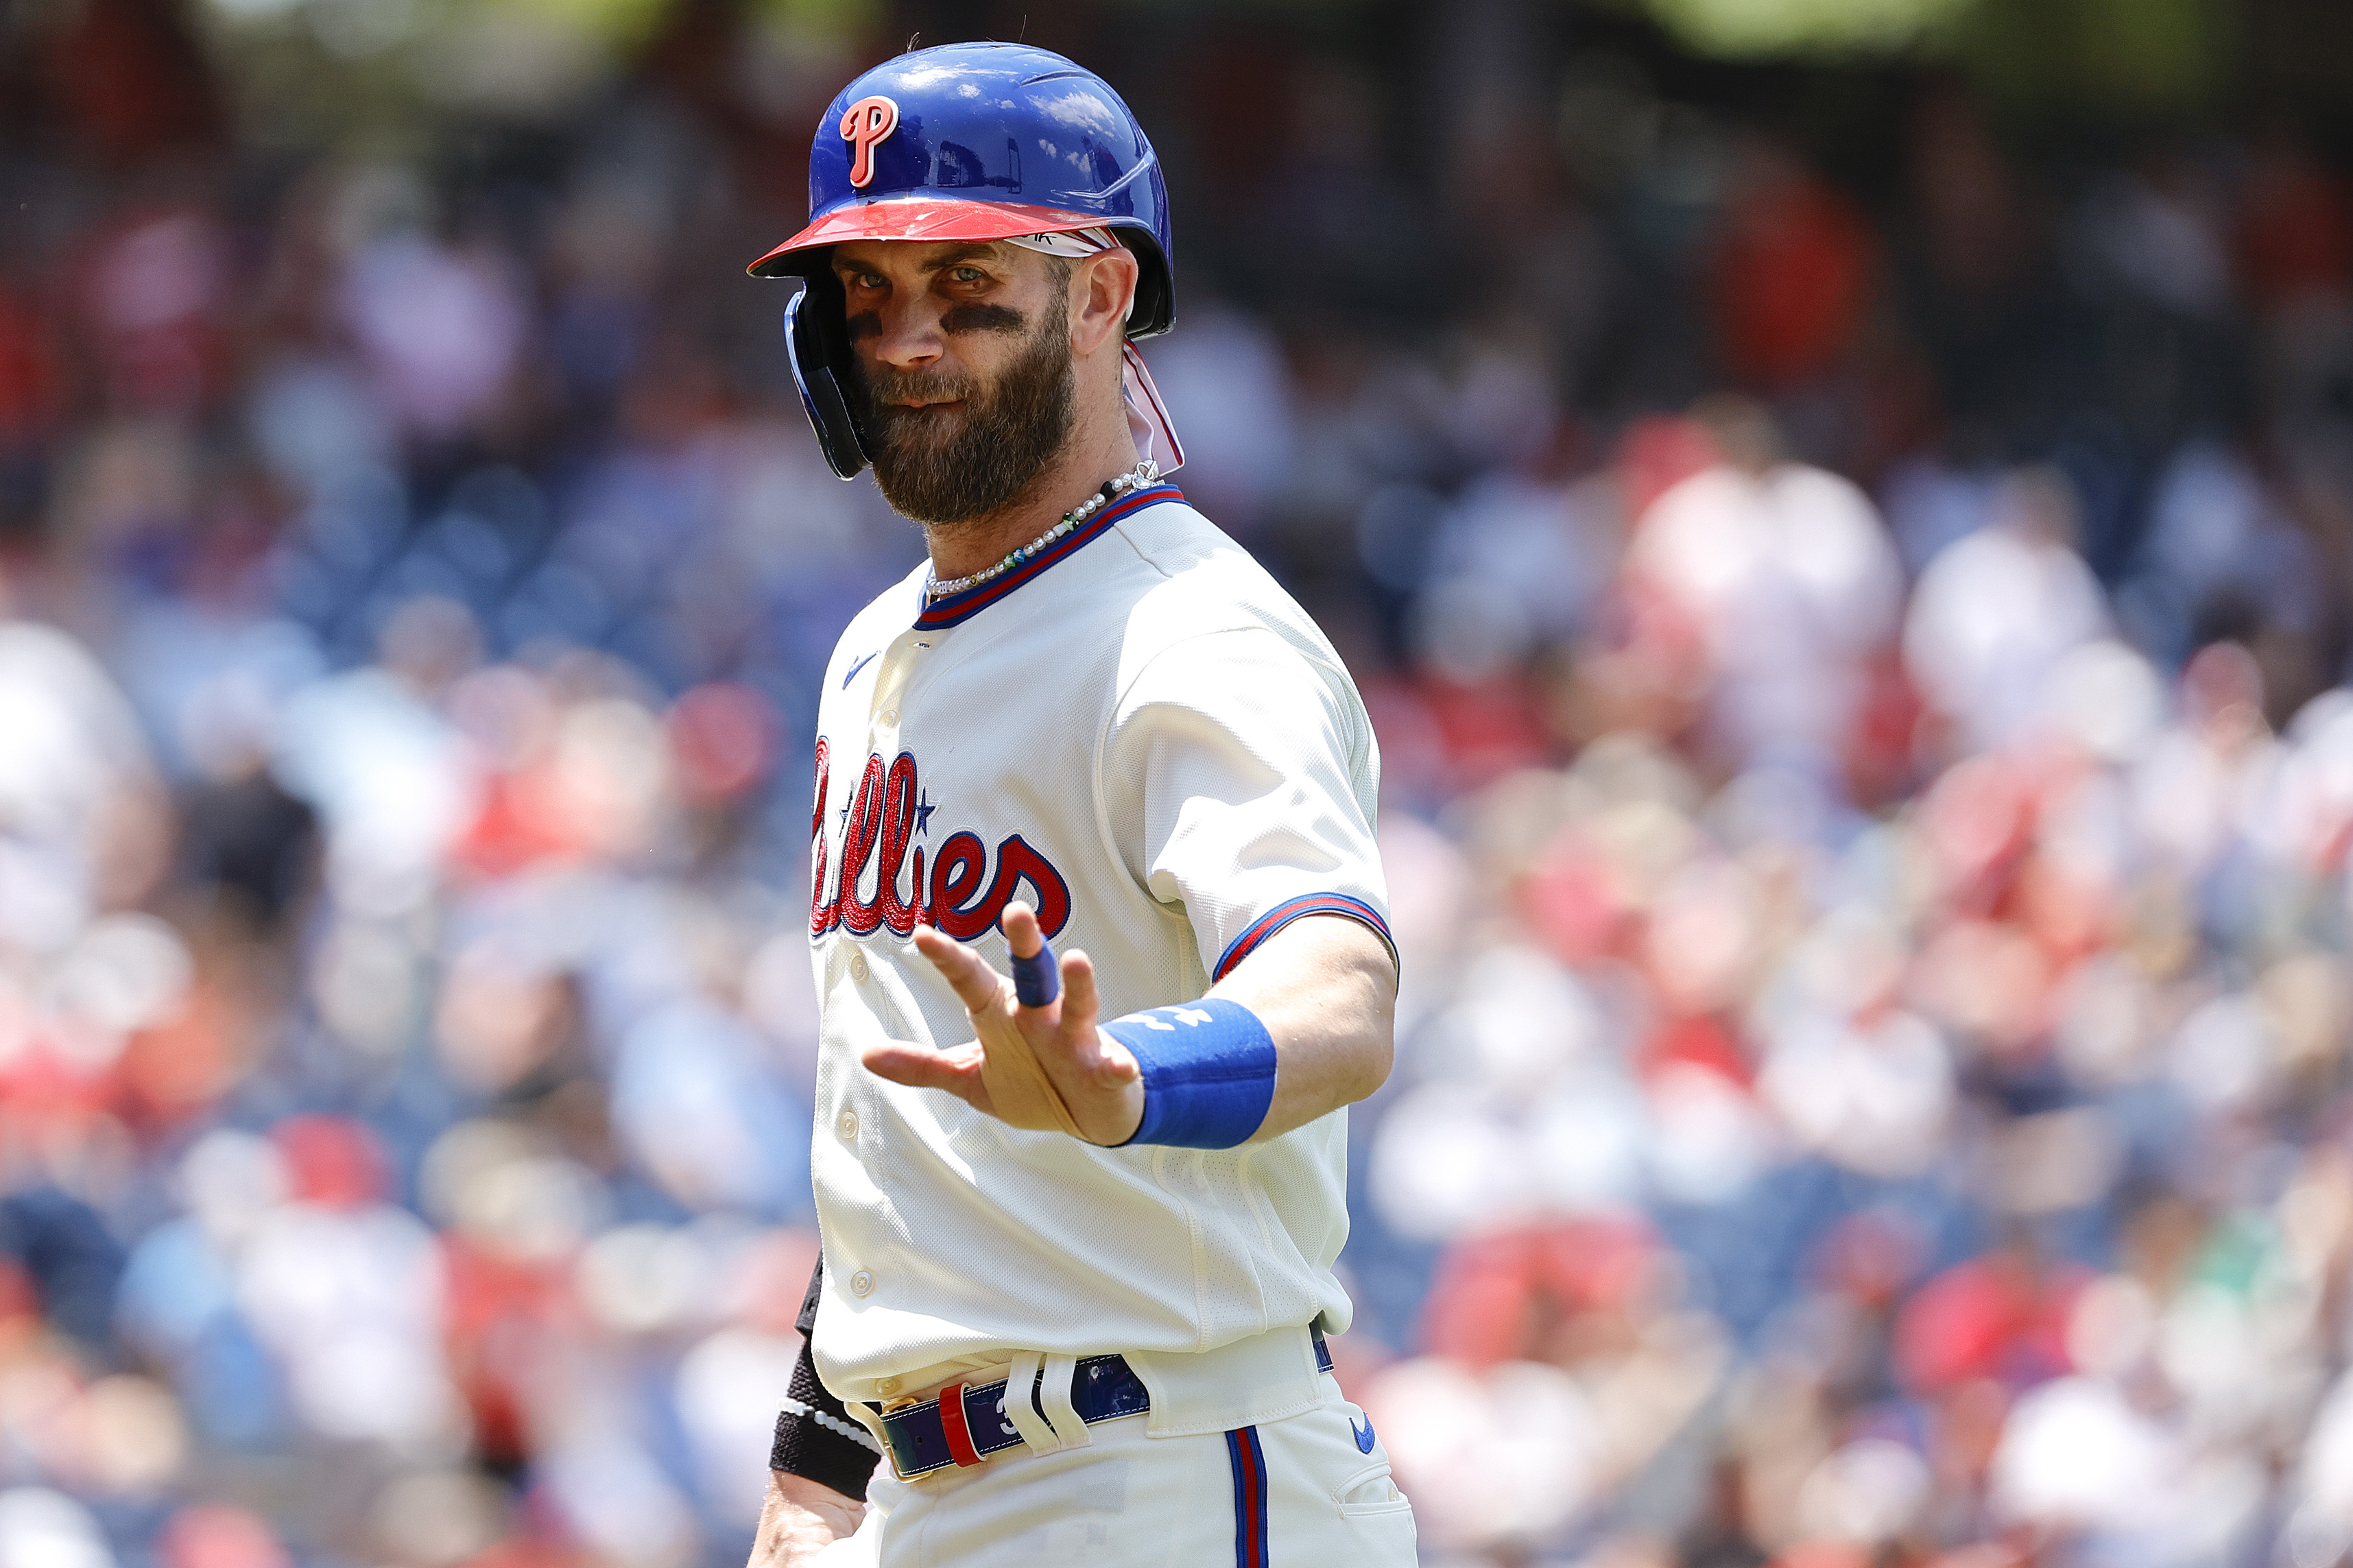 Phillies: Bryce Harper hit by pitch, out of lineup saturday